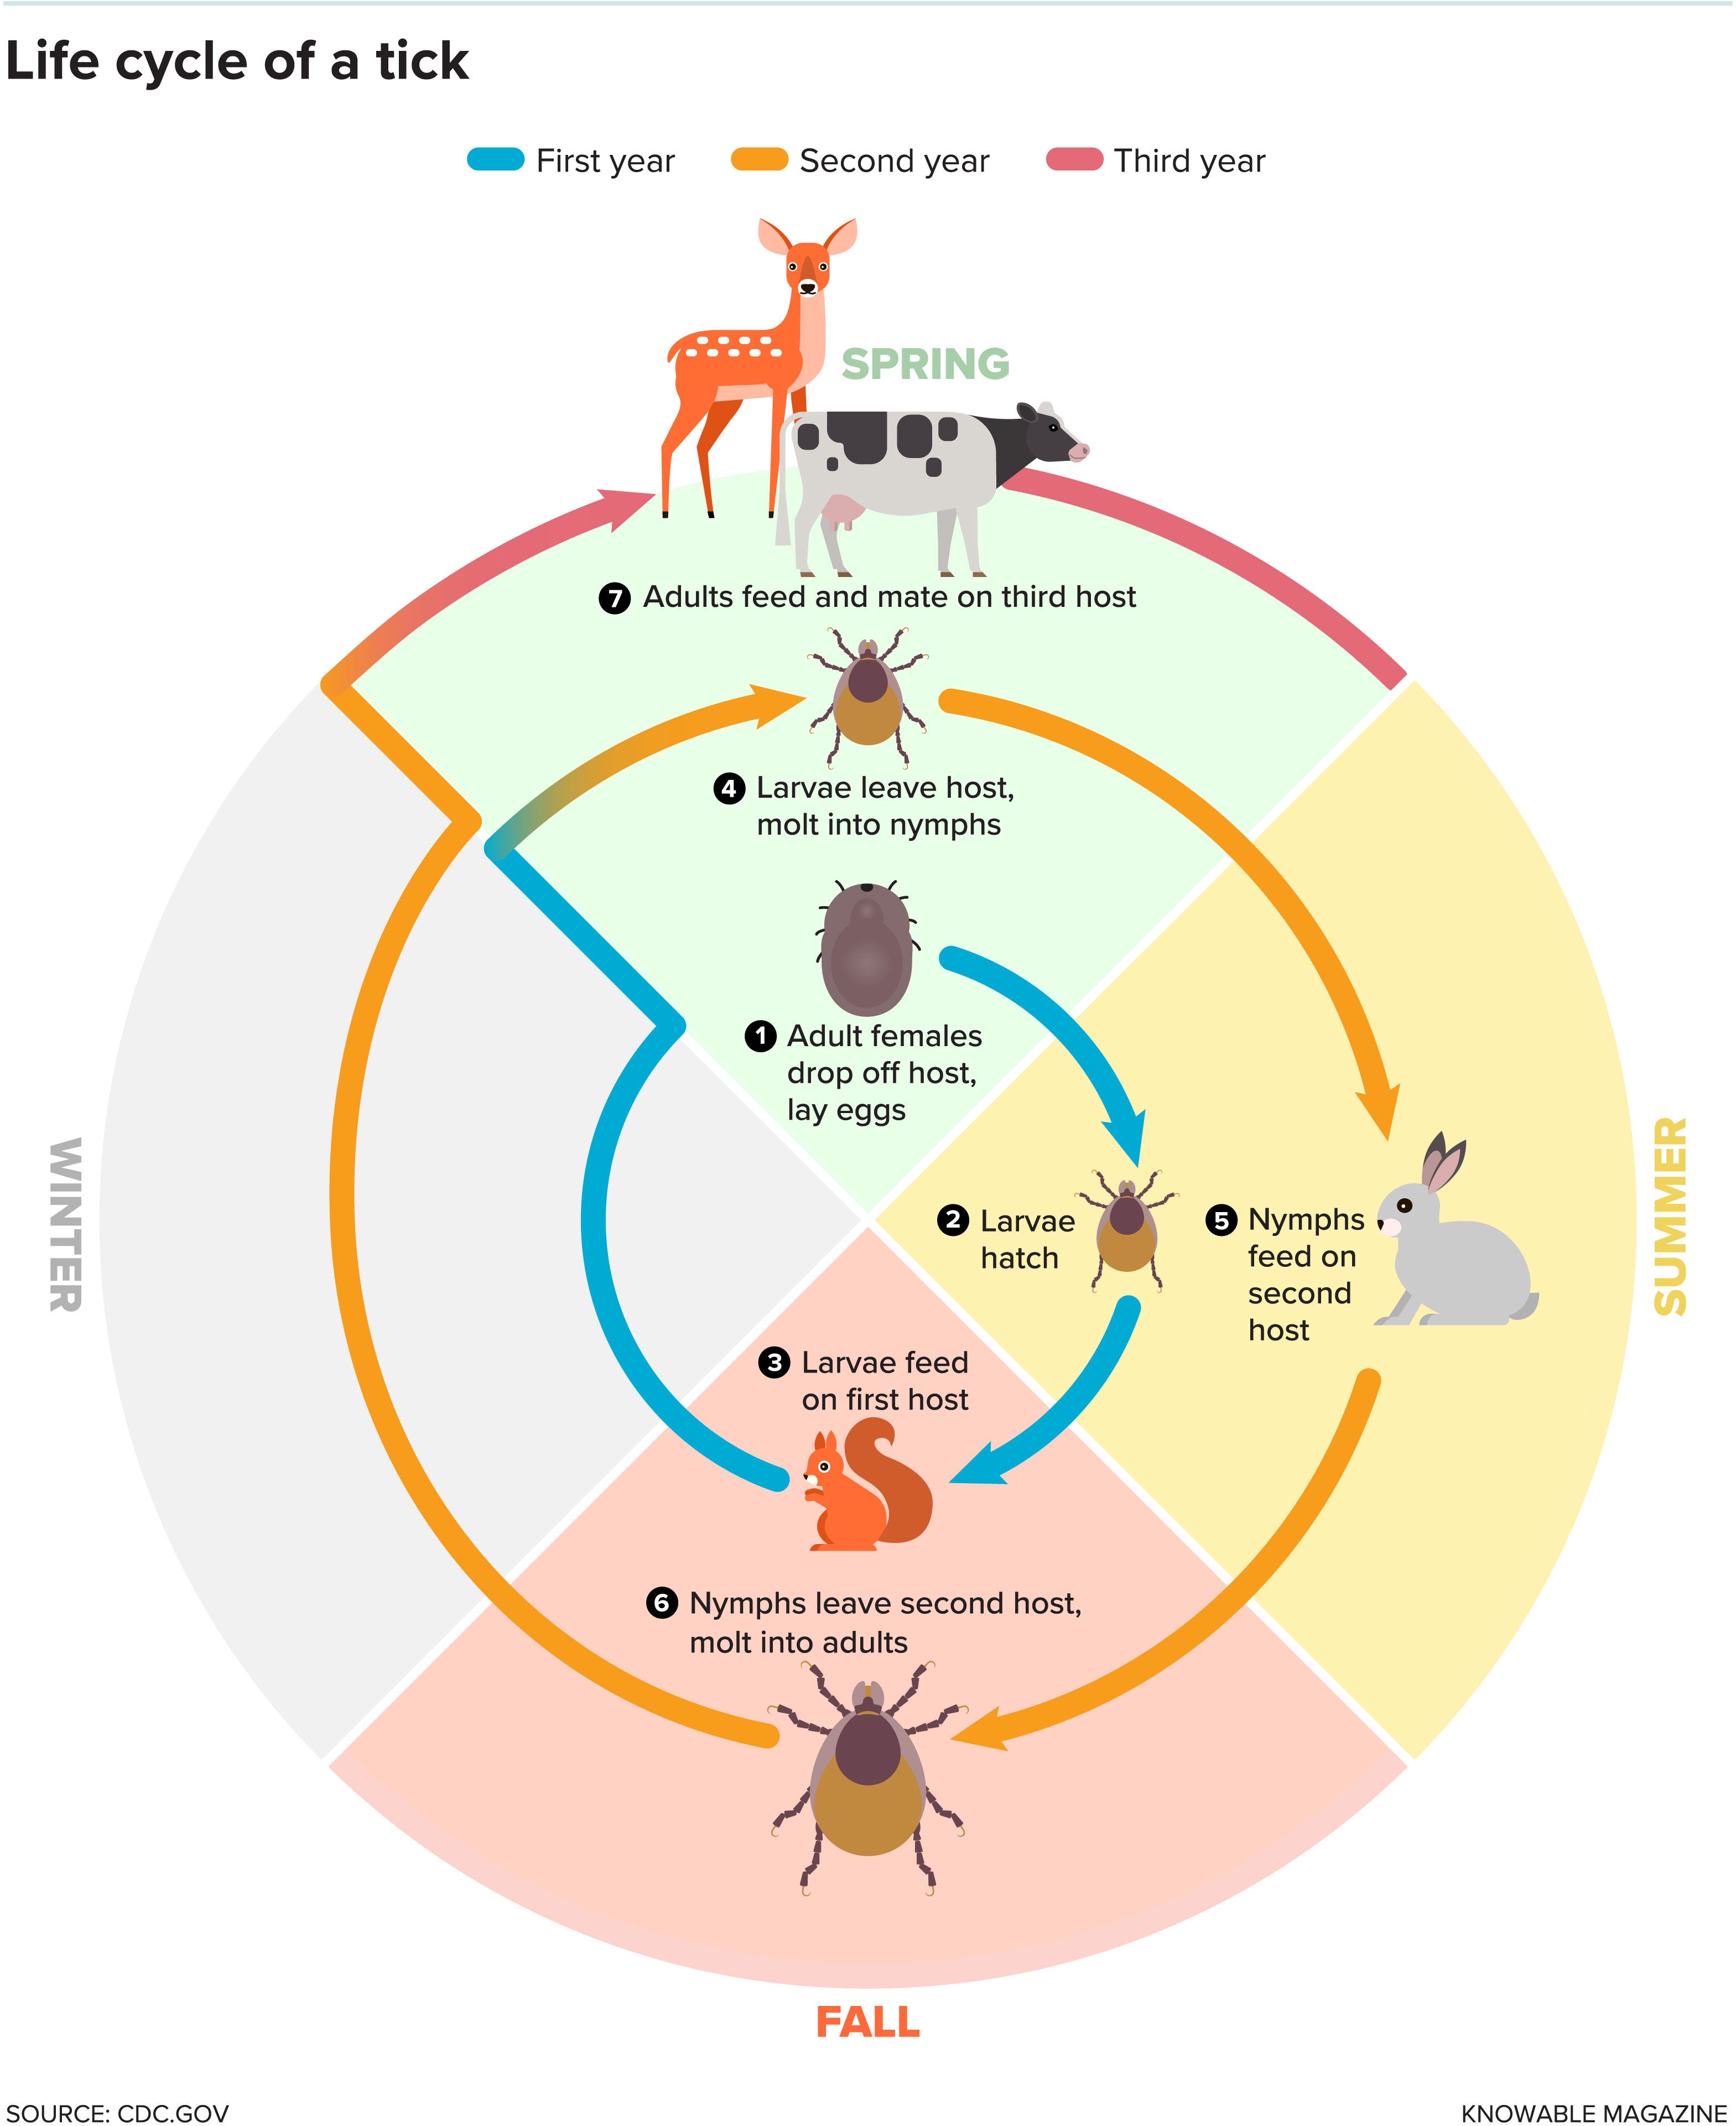 Life cycle of a tick.